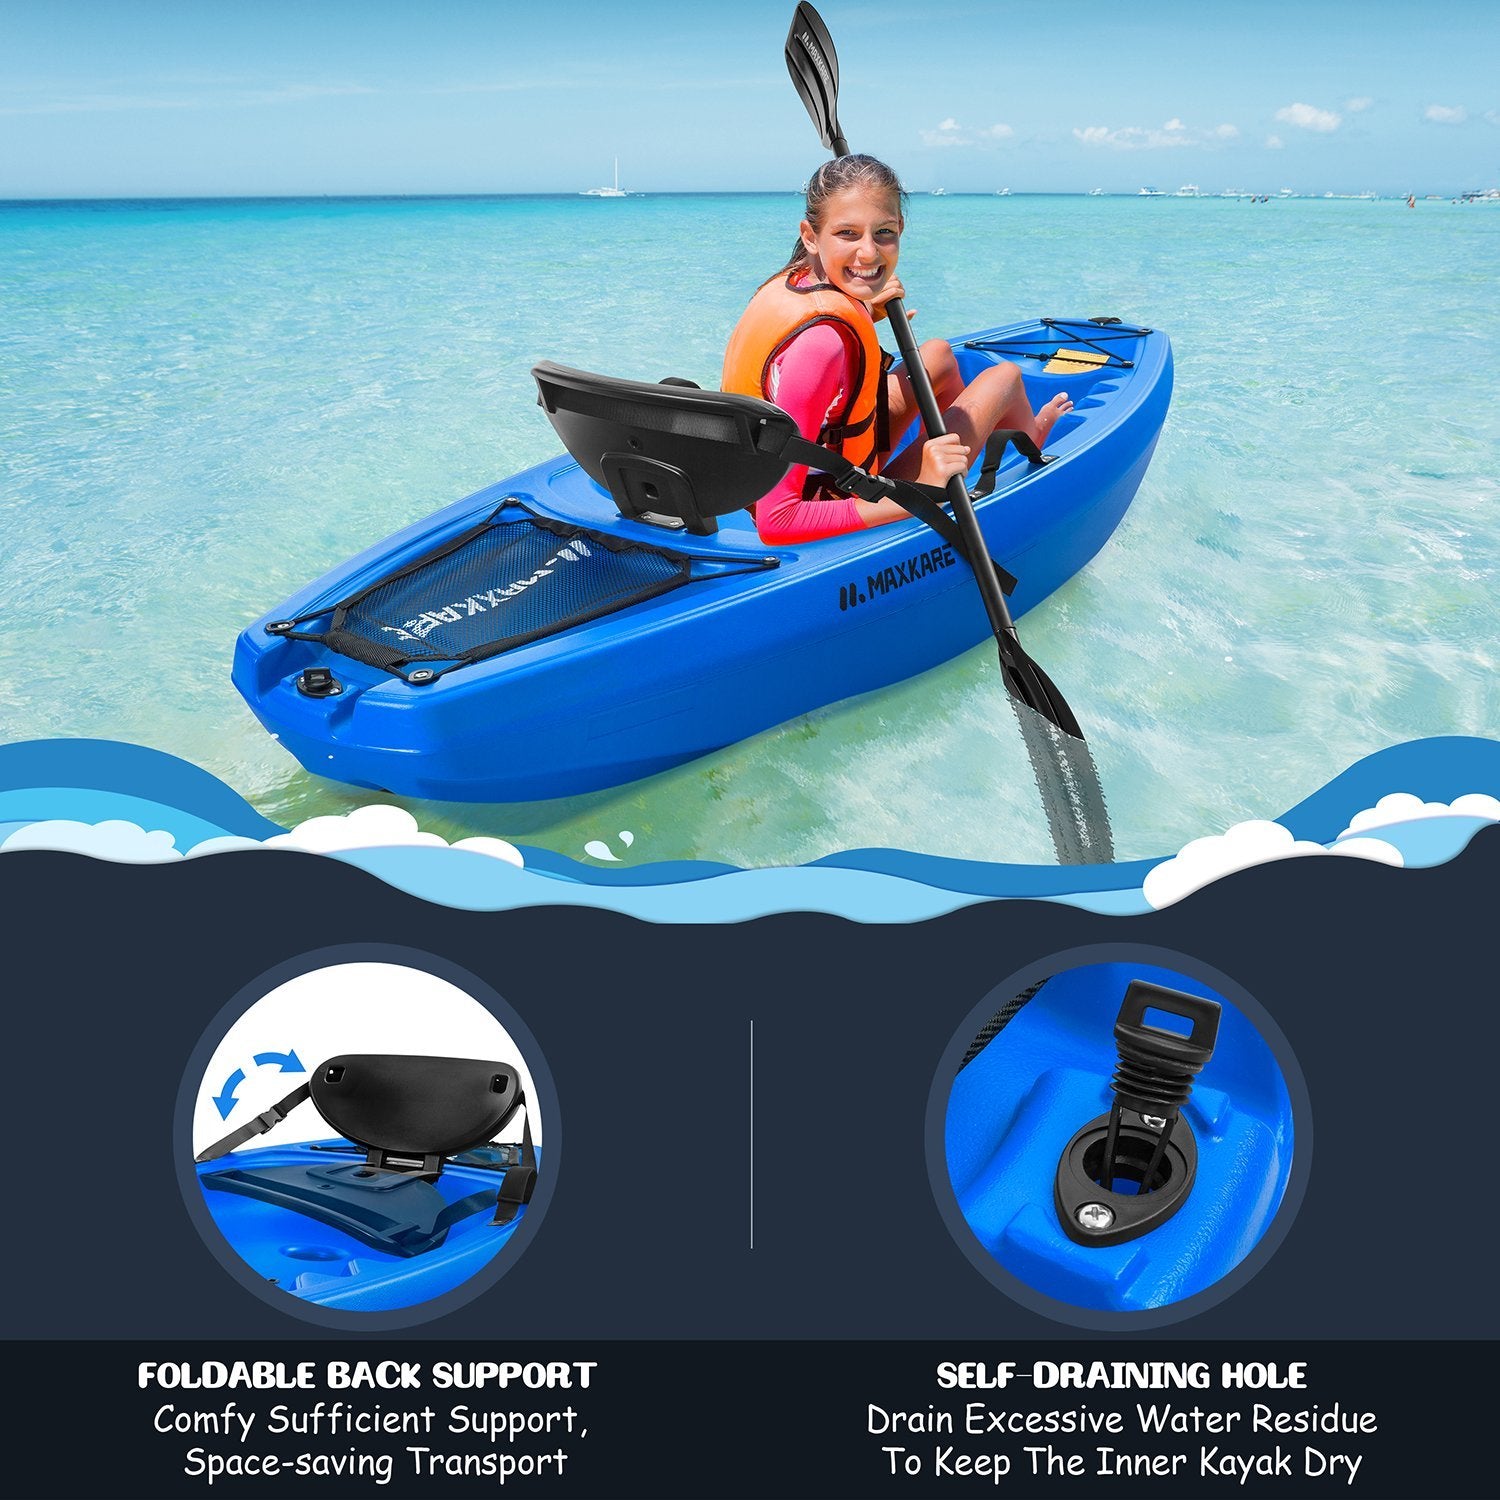 Load image into Gallery viewer, MaxKare Kids Kayak with Paddle &amp; Seat Youth Kayak Sit-On-Top Kayak Foldable 6ft Kayak with Cup Holders Front &amp; Rear Storage Hatches for Ages Years 5 and Up Capacity 121 lbs Blue - NAIPO
